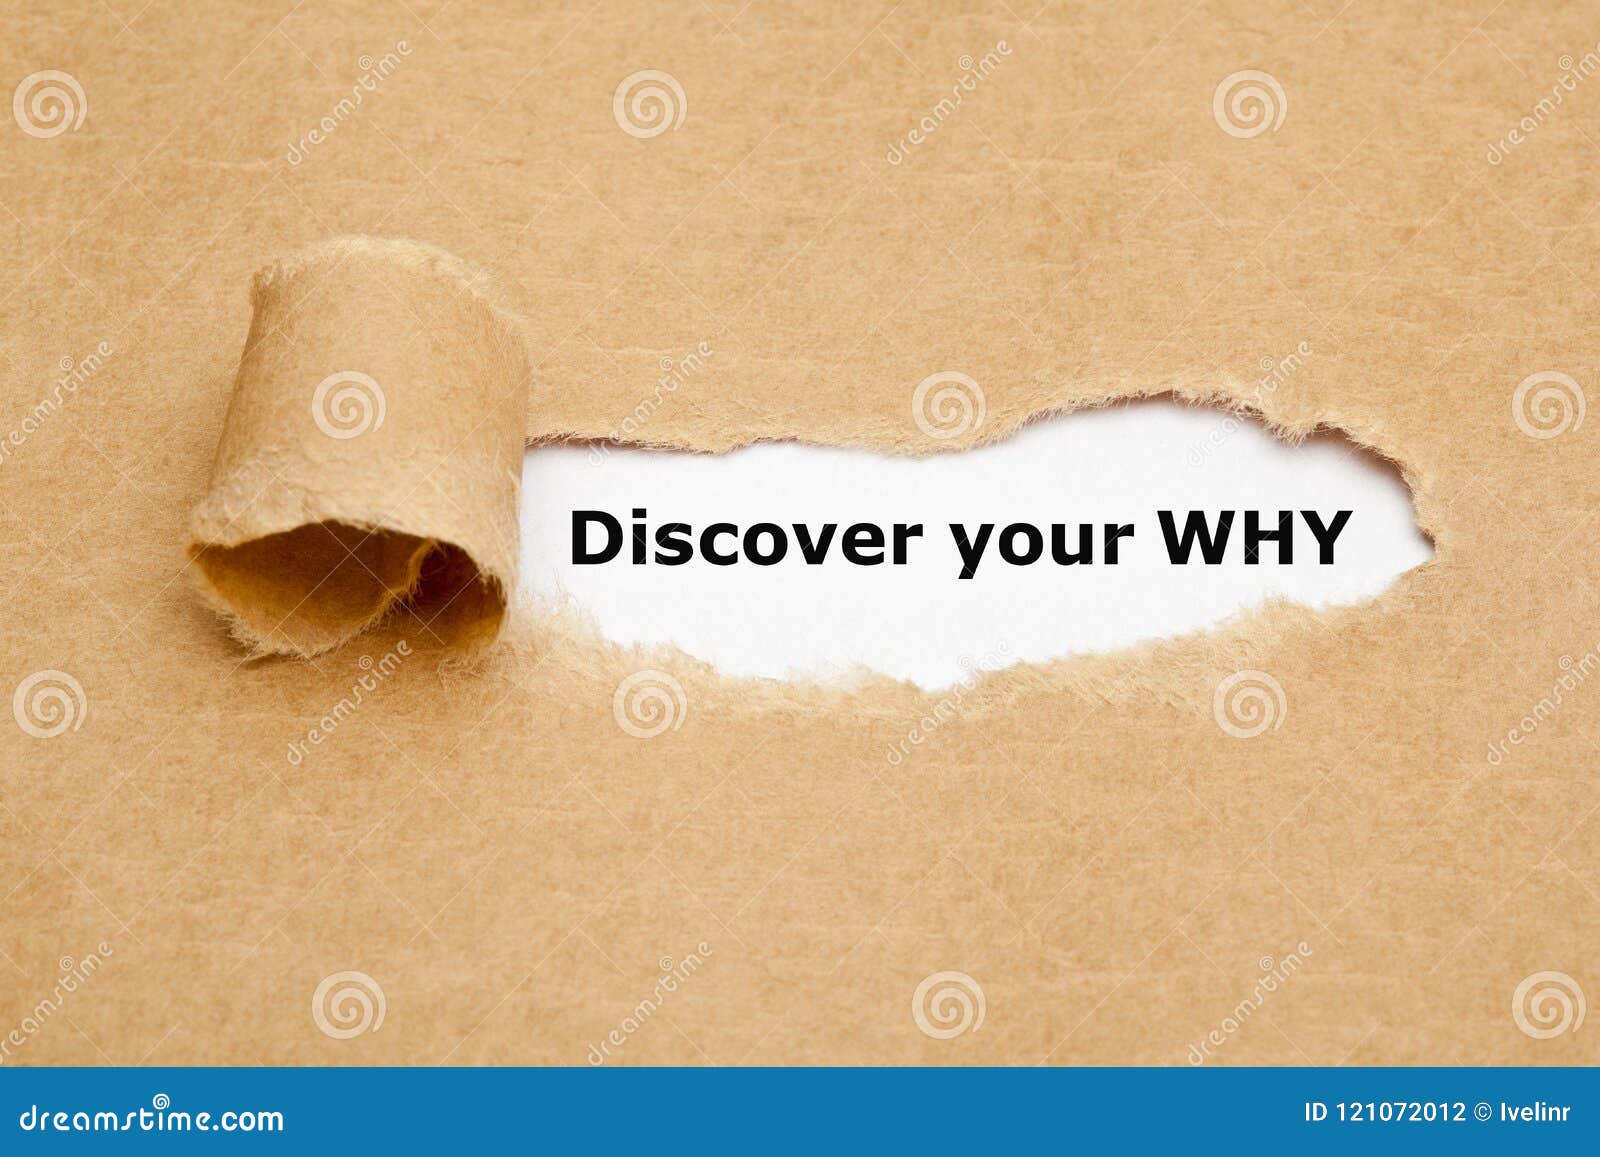 discover your why torn paper concept